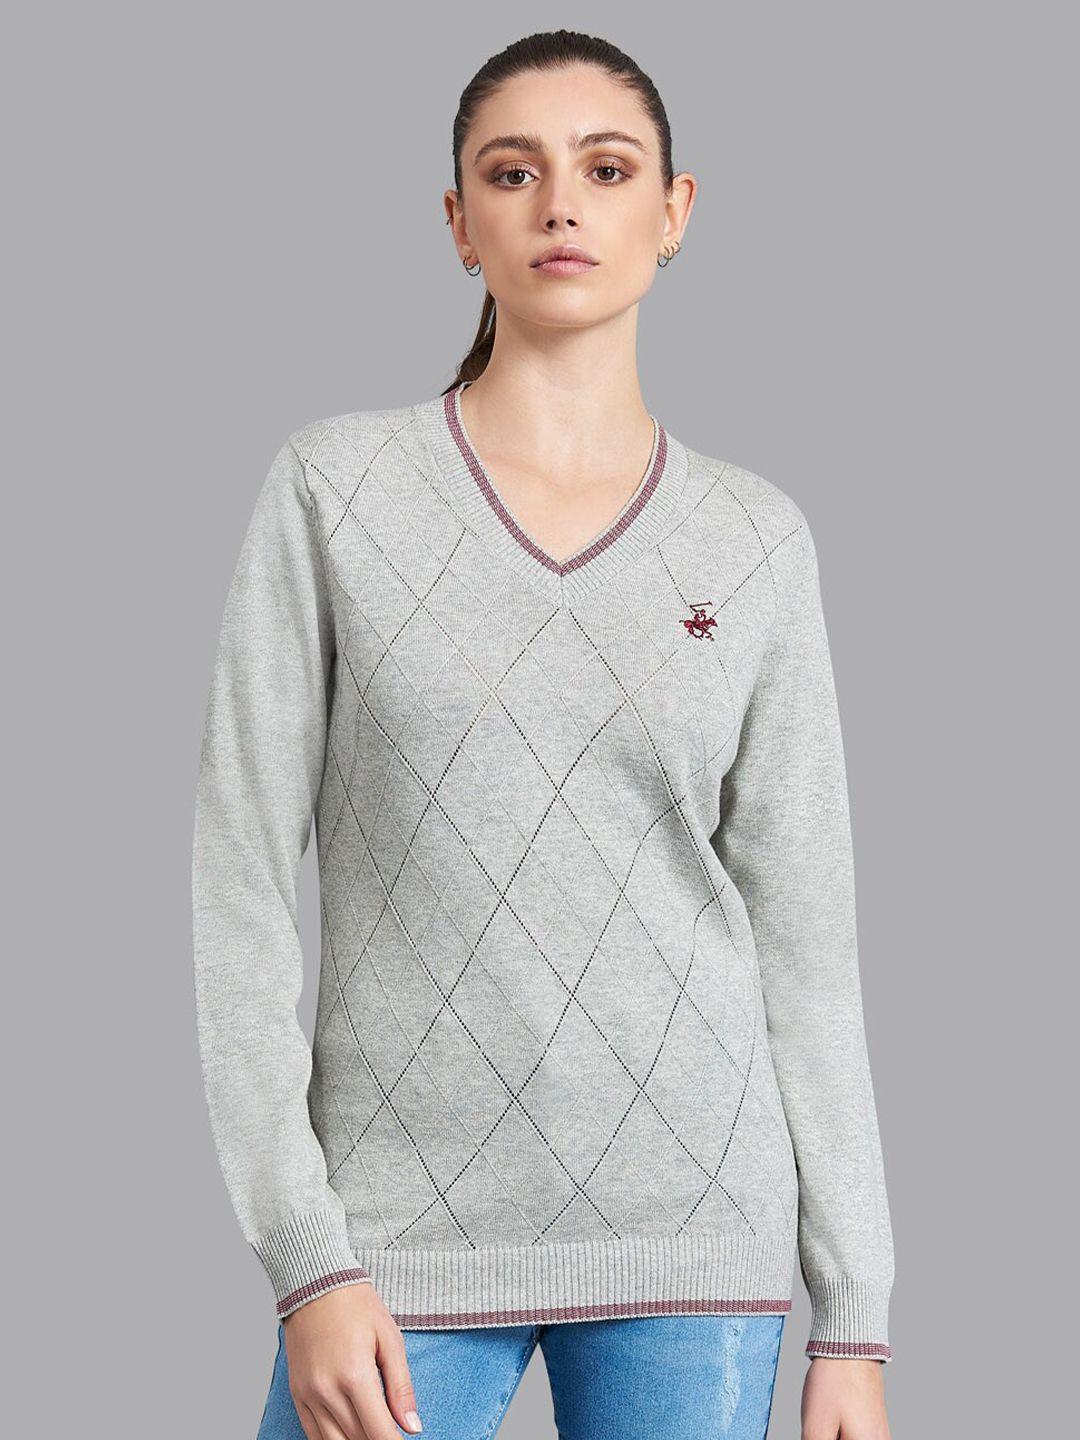 beverly-hills-polo-club-women-grey-open-knit-pullover